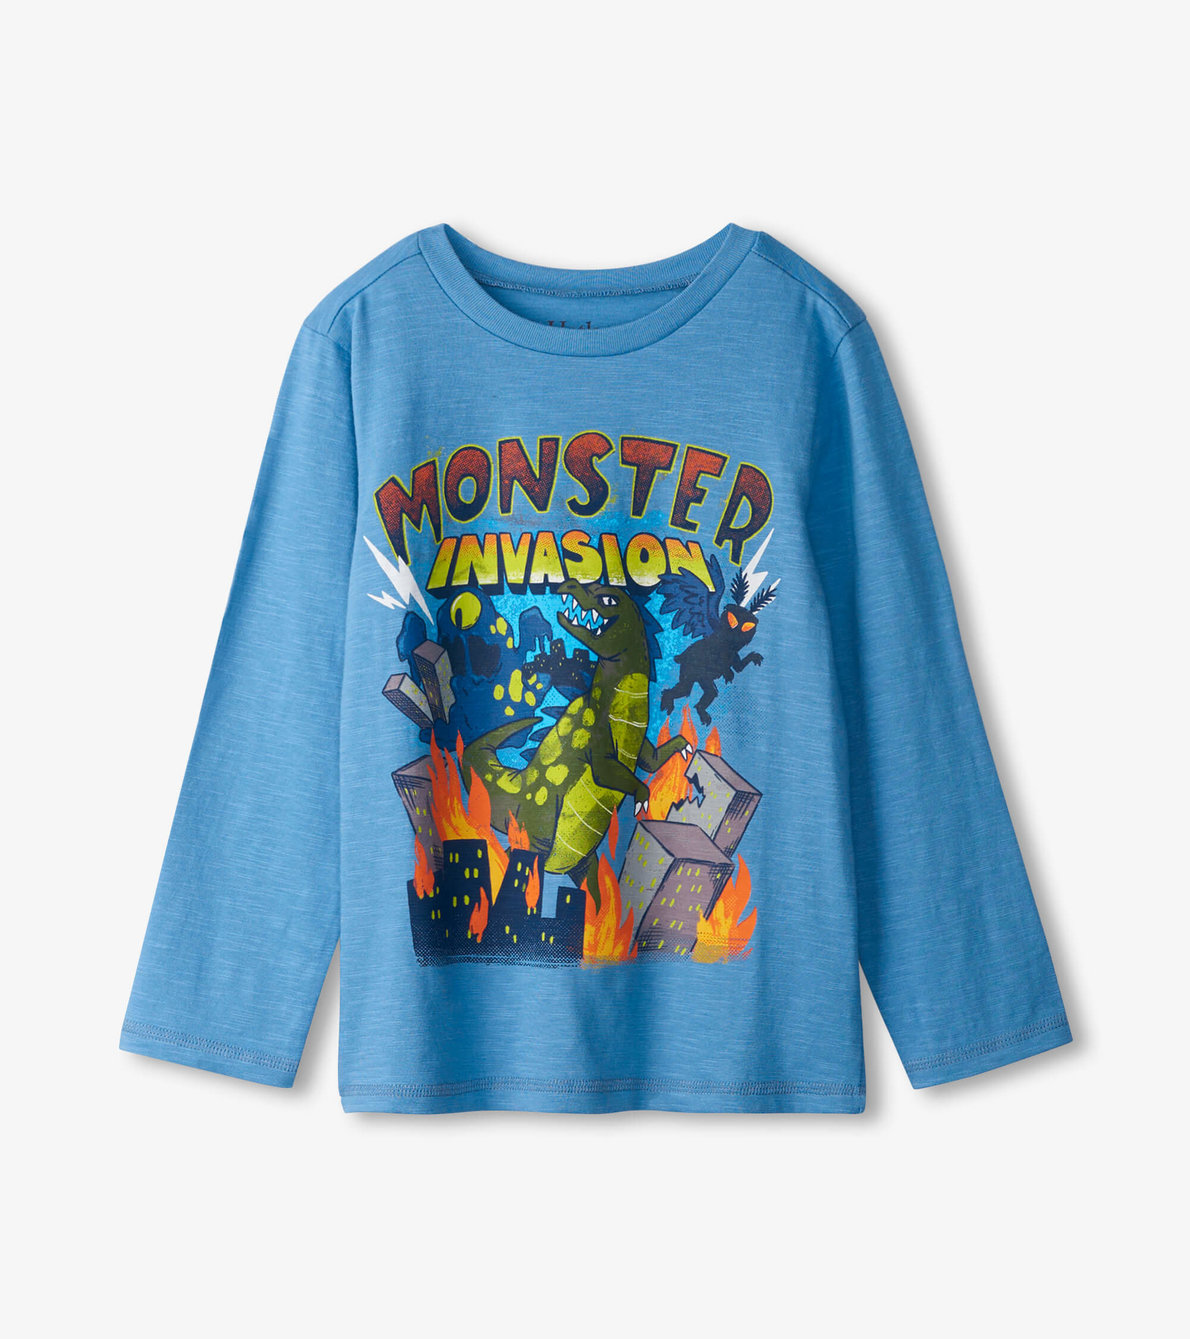 View larger image of Monster Invasion Long Sleeve Tee